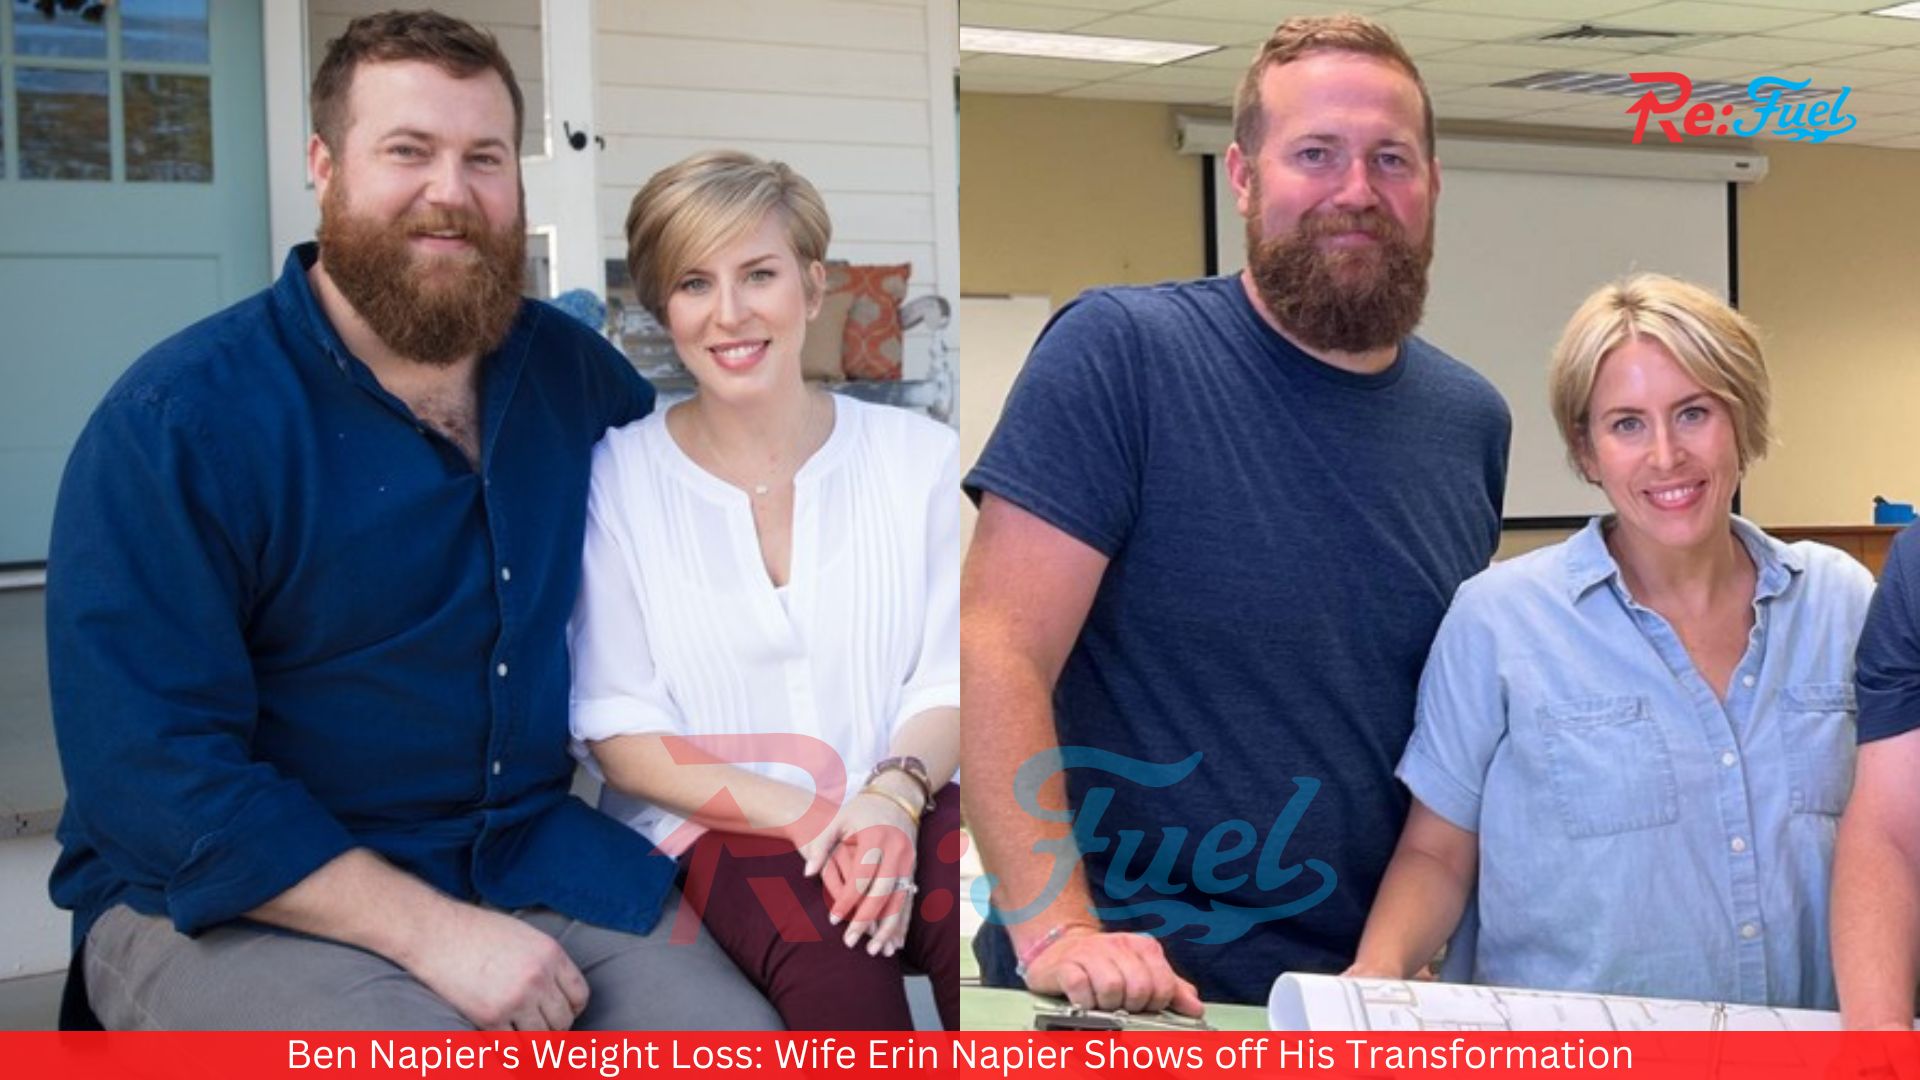 Ben Napier's Weight Loss: Wife Erin Napier Shows off His Transformation